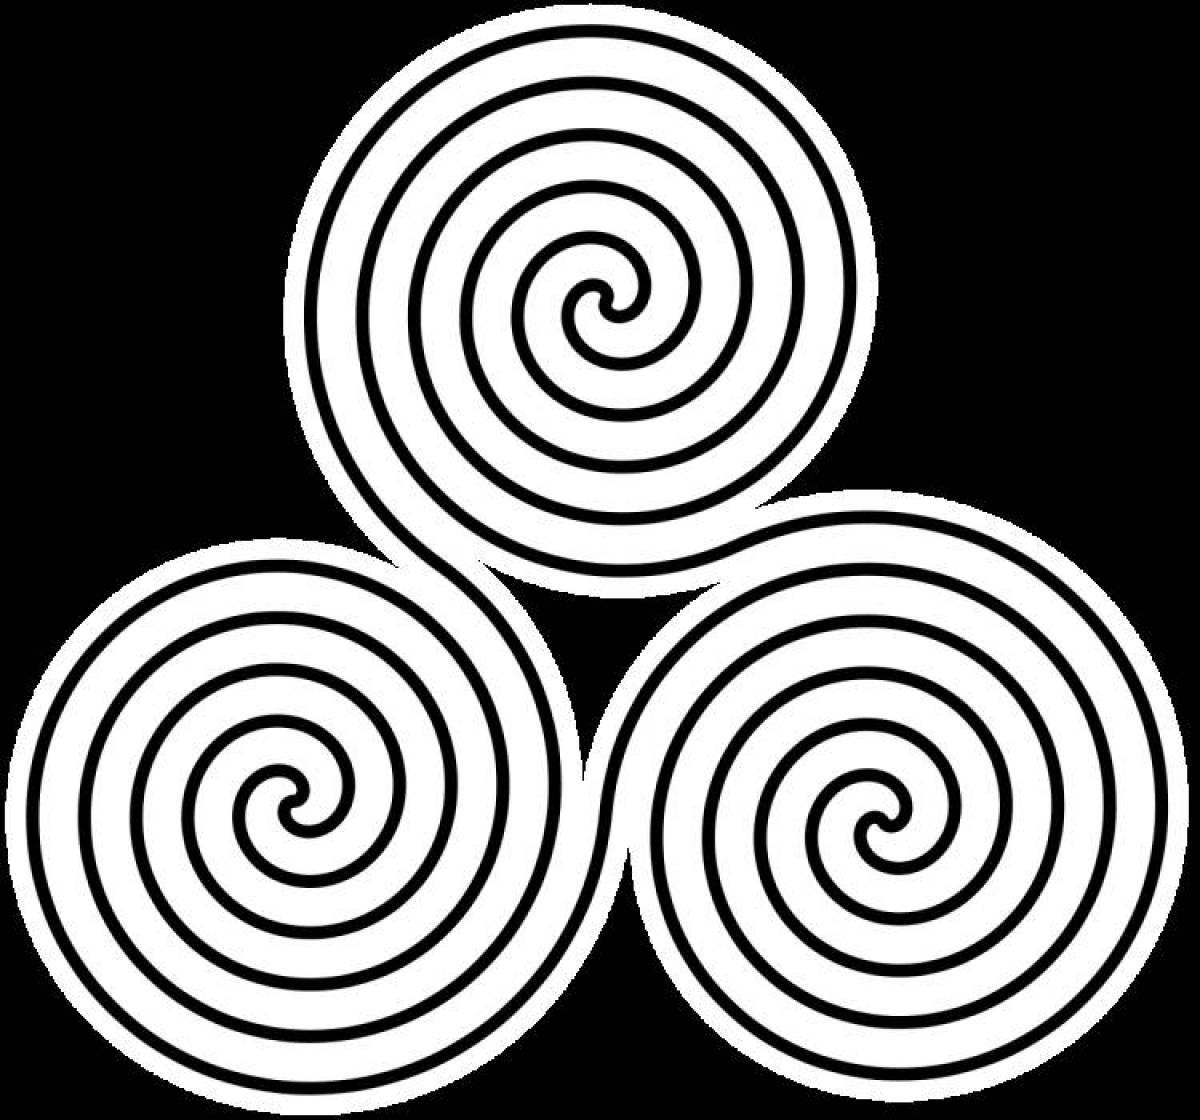 Coloring Page of Balanced Spiral